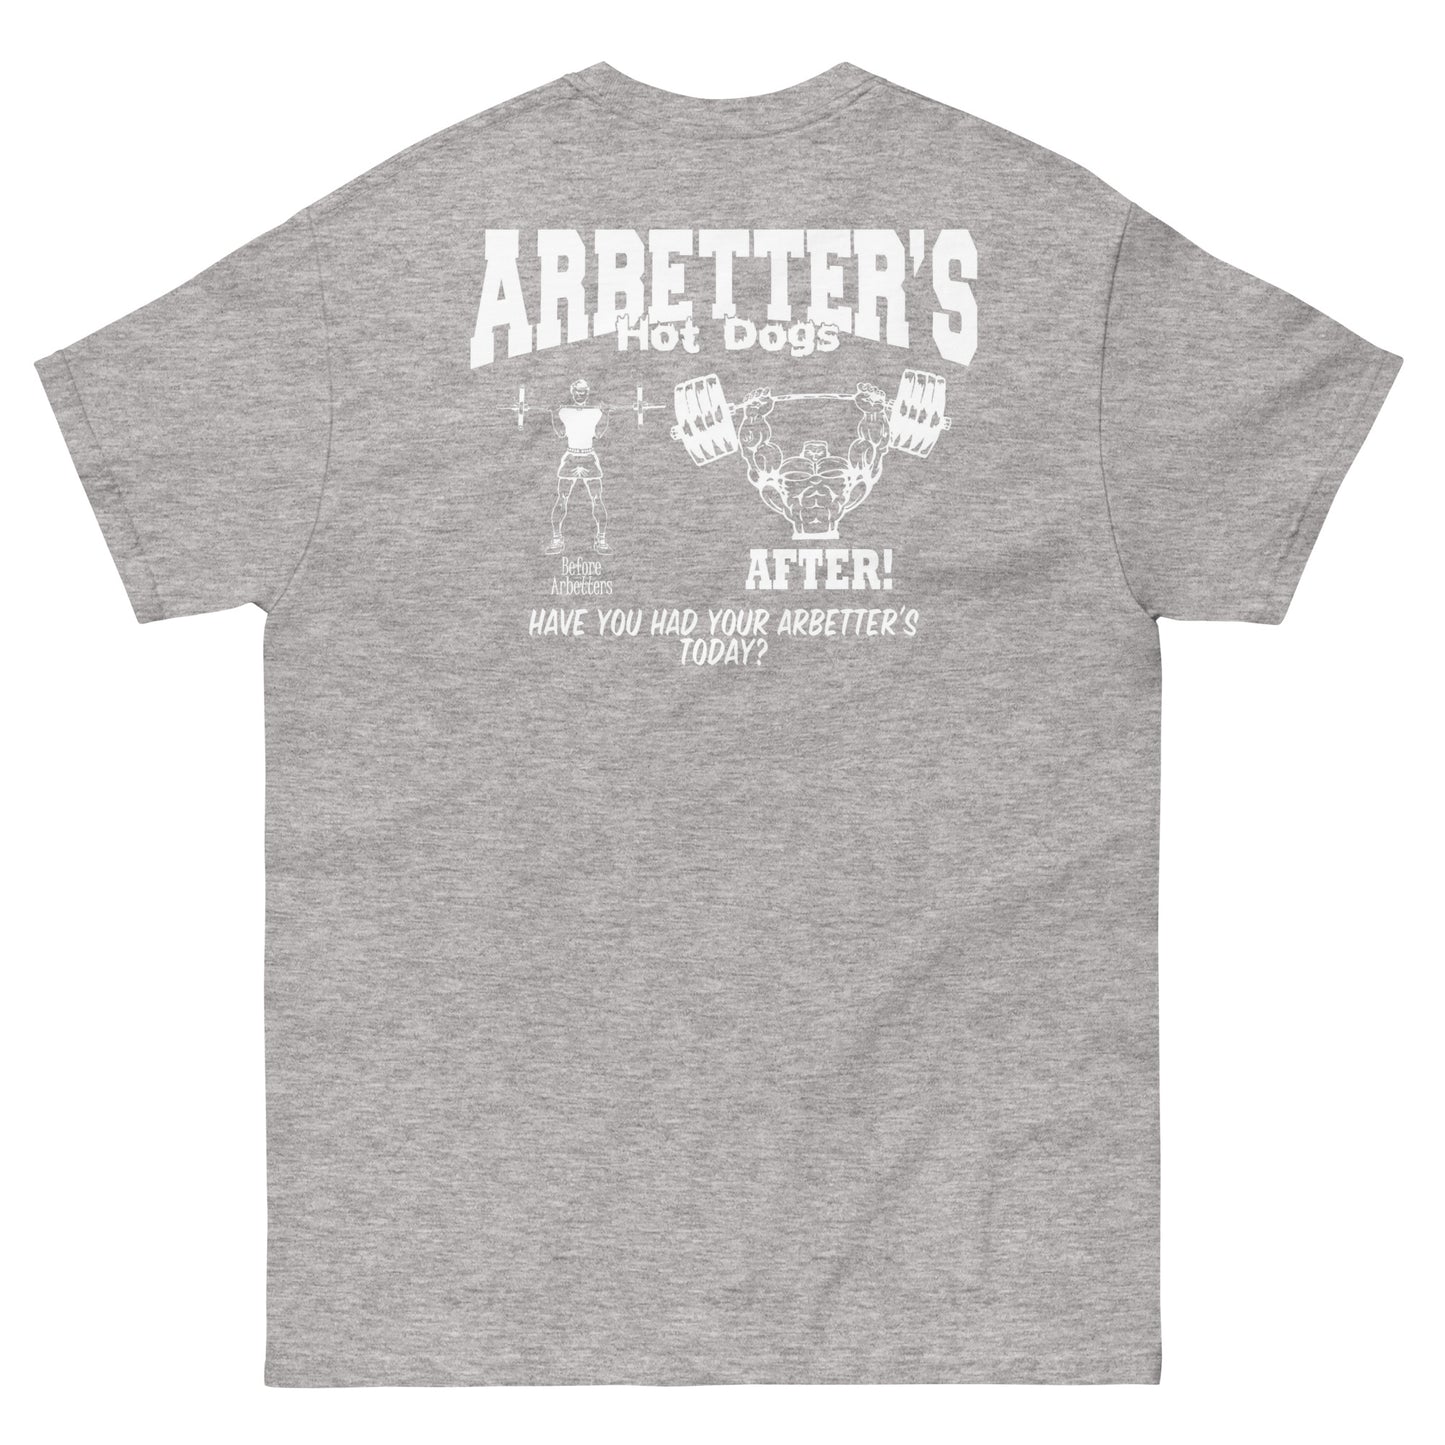 Before/After Arbetter's Men's classic tee